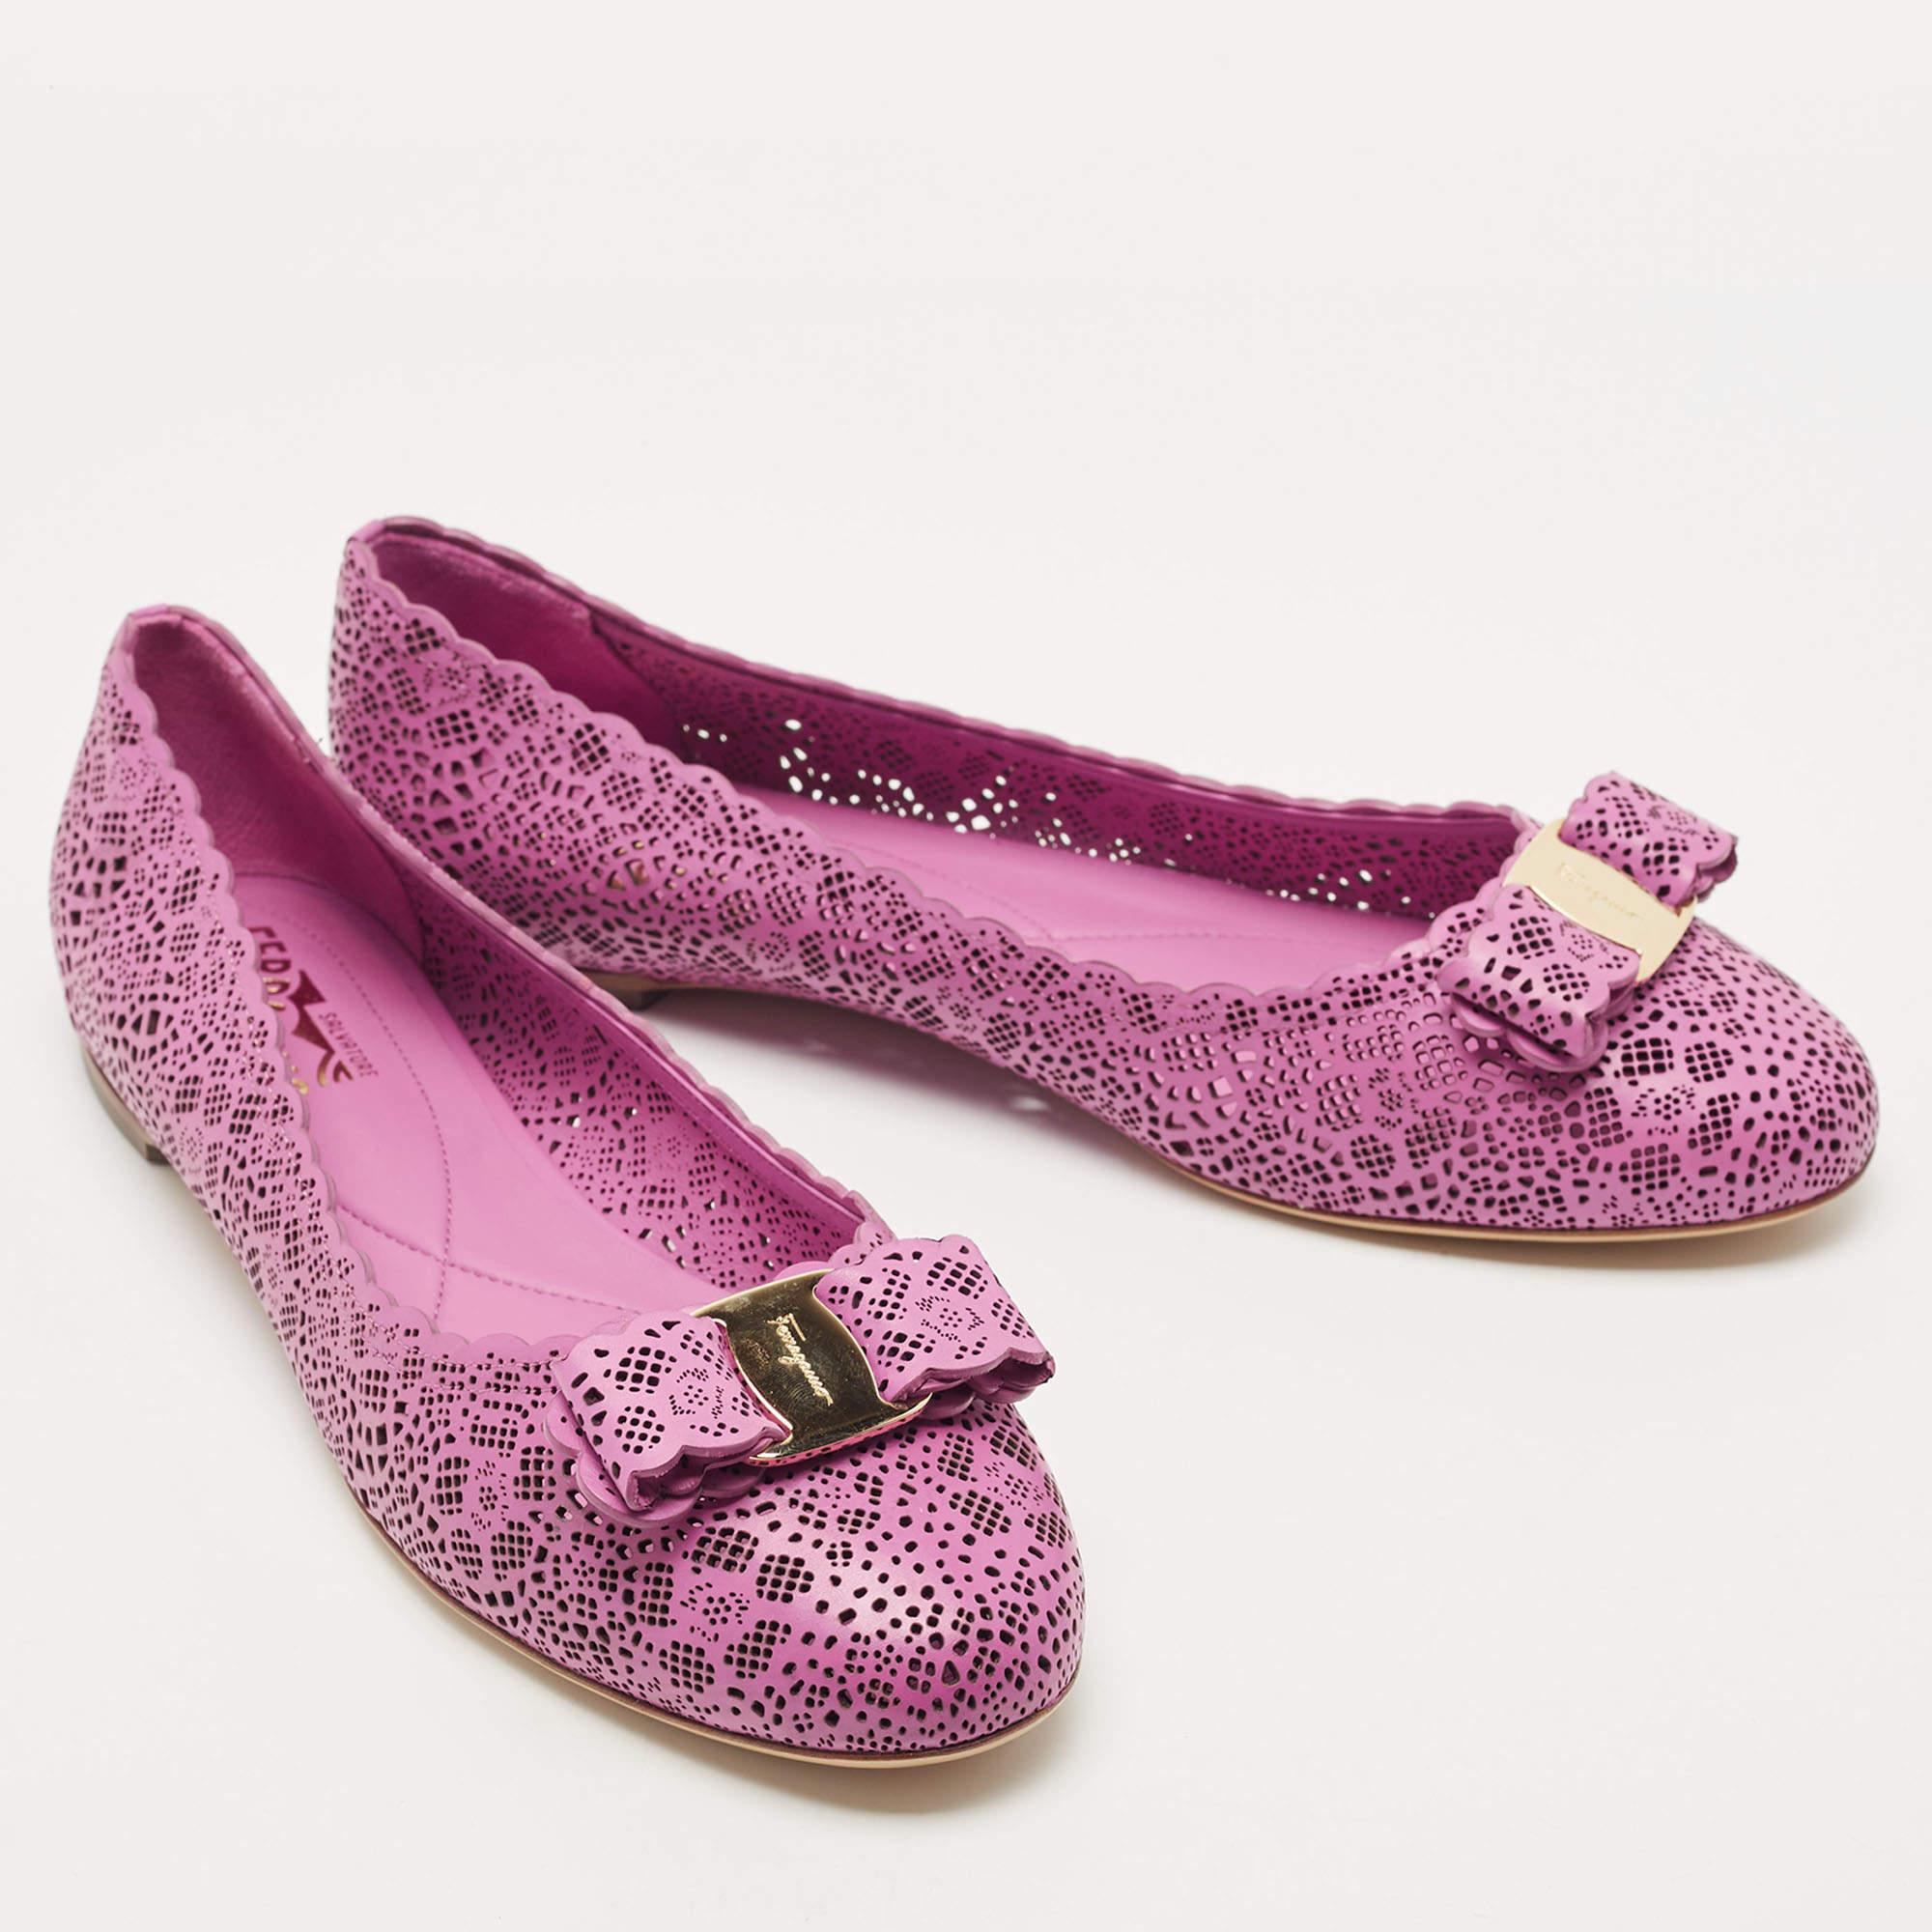 Defined by comfort and effortless style, no wardrobe is ever complete without a pair of chic ballet flats. This pair is lovely to look at and is equipped with elements like a comfortable insole and a durable sole.

Includes
Original Box, Original